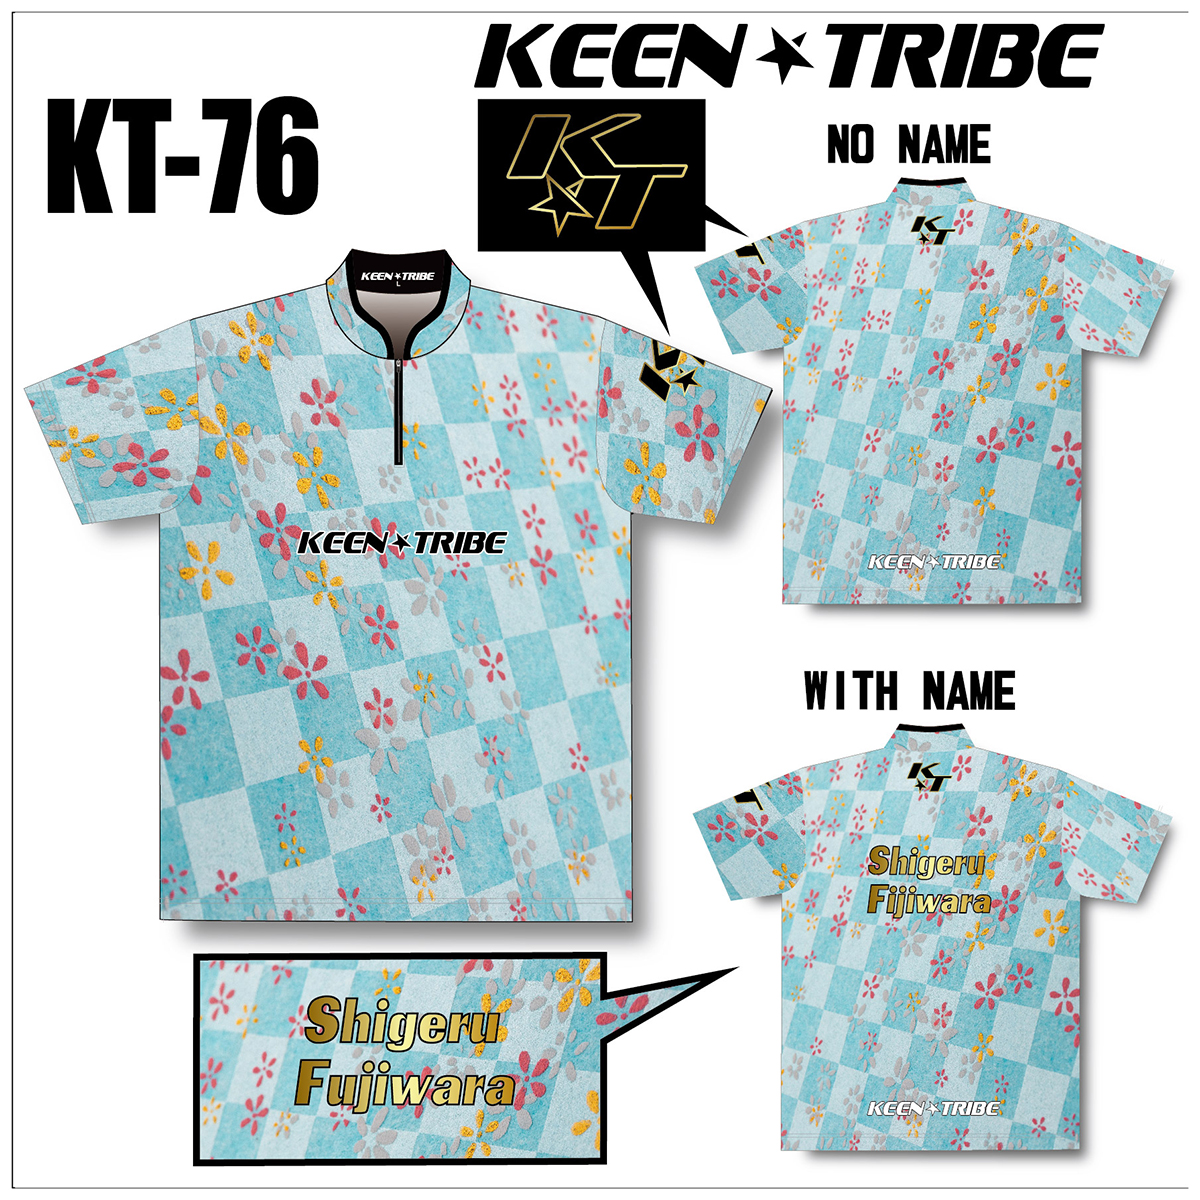 KEEN ★ TRIBE　KT-76(受注生産)